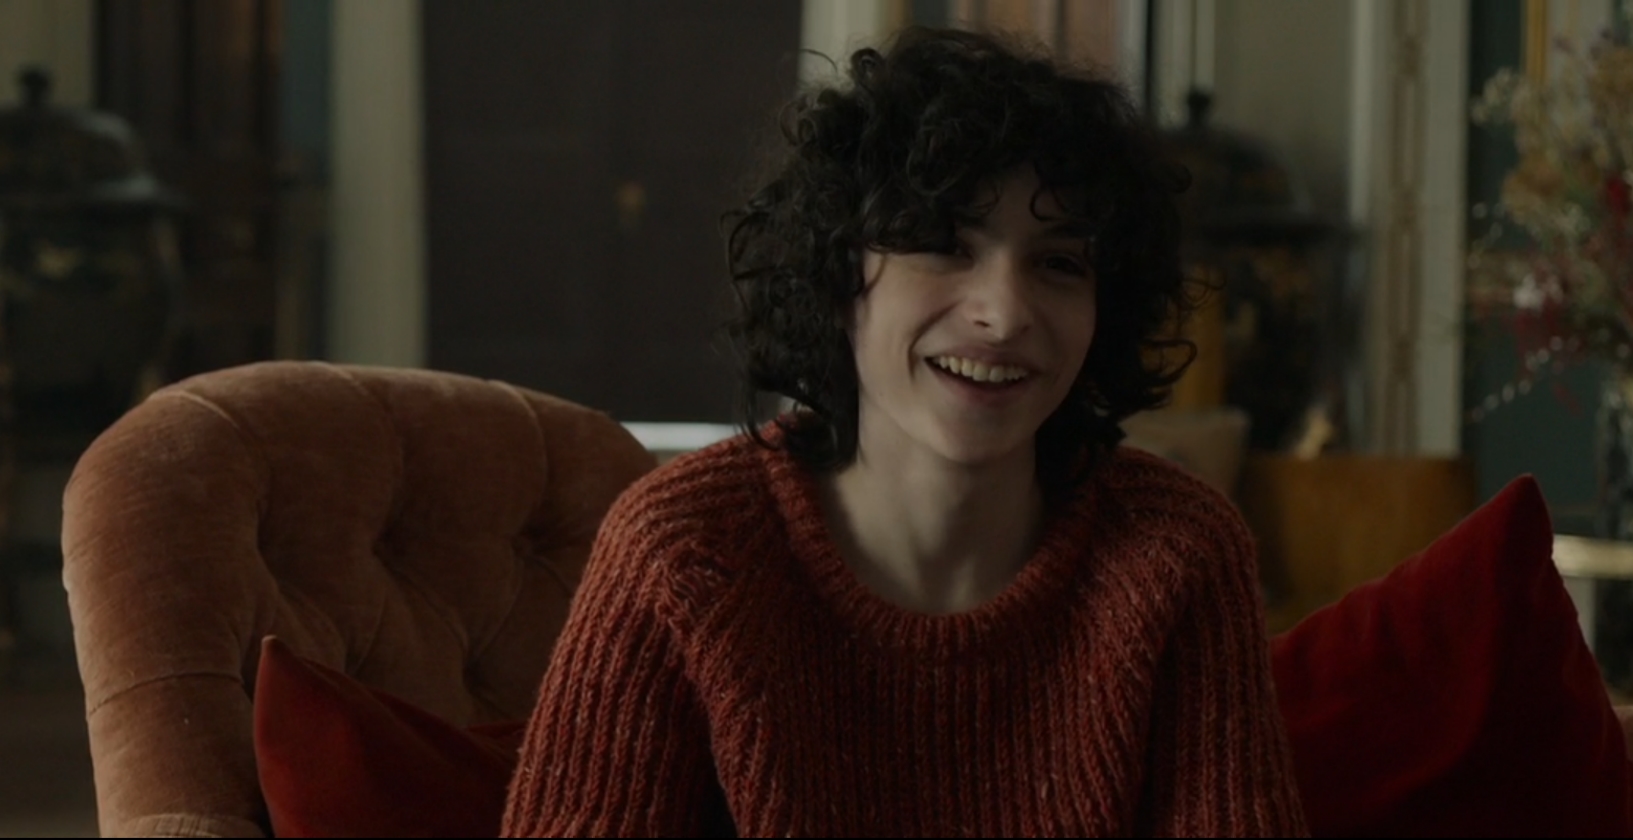 Picture of Finn Wolfhard in The Turning - finn-wolfhard-1586377971.jpg ...